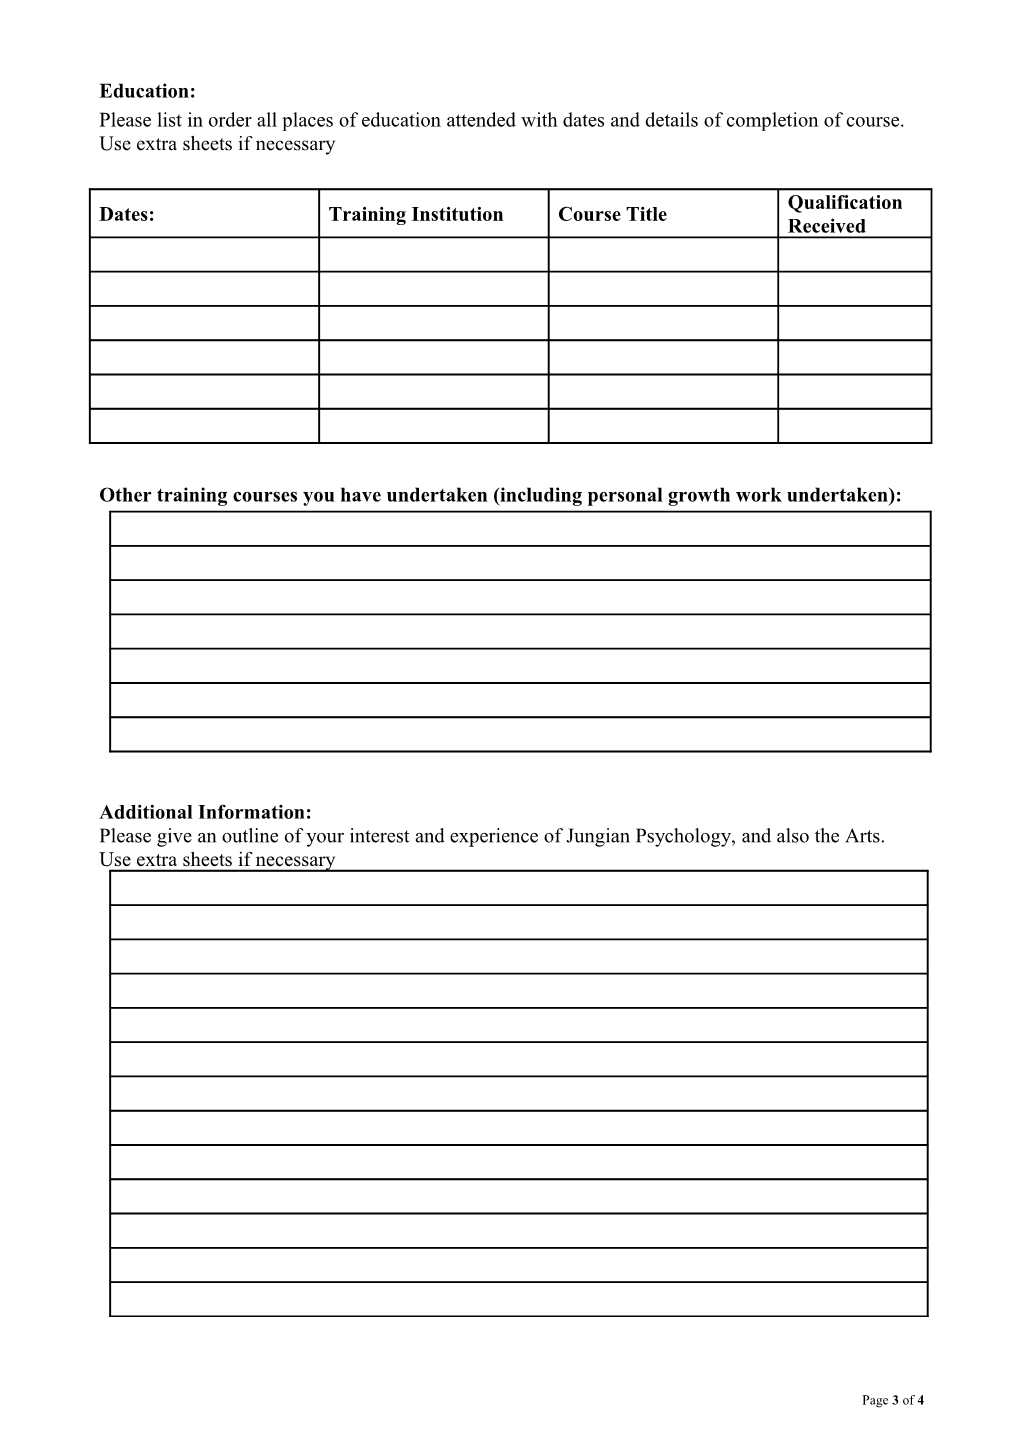 Flexible Learning Application Form